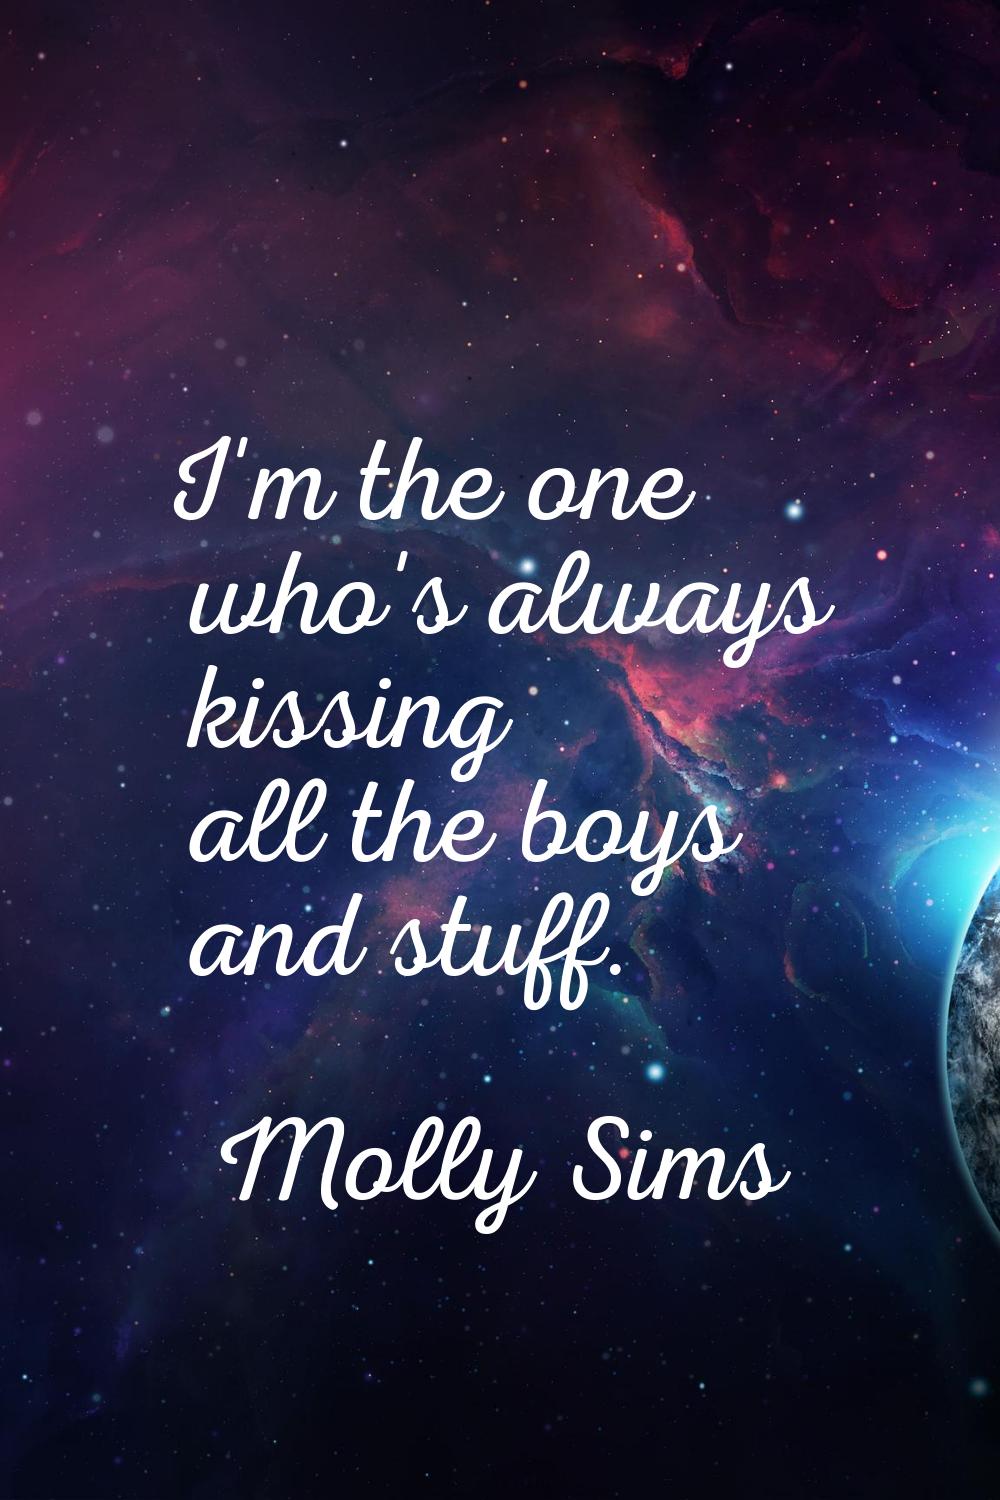 I'm the one who's always kissing all the boys and stuff.